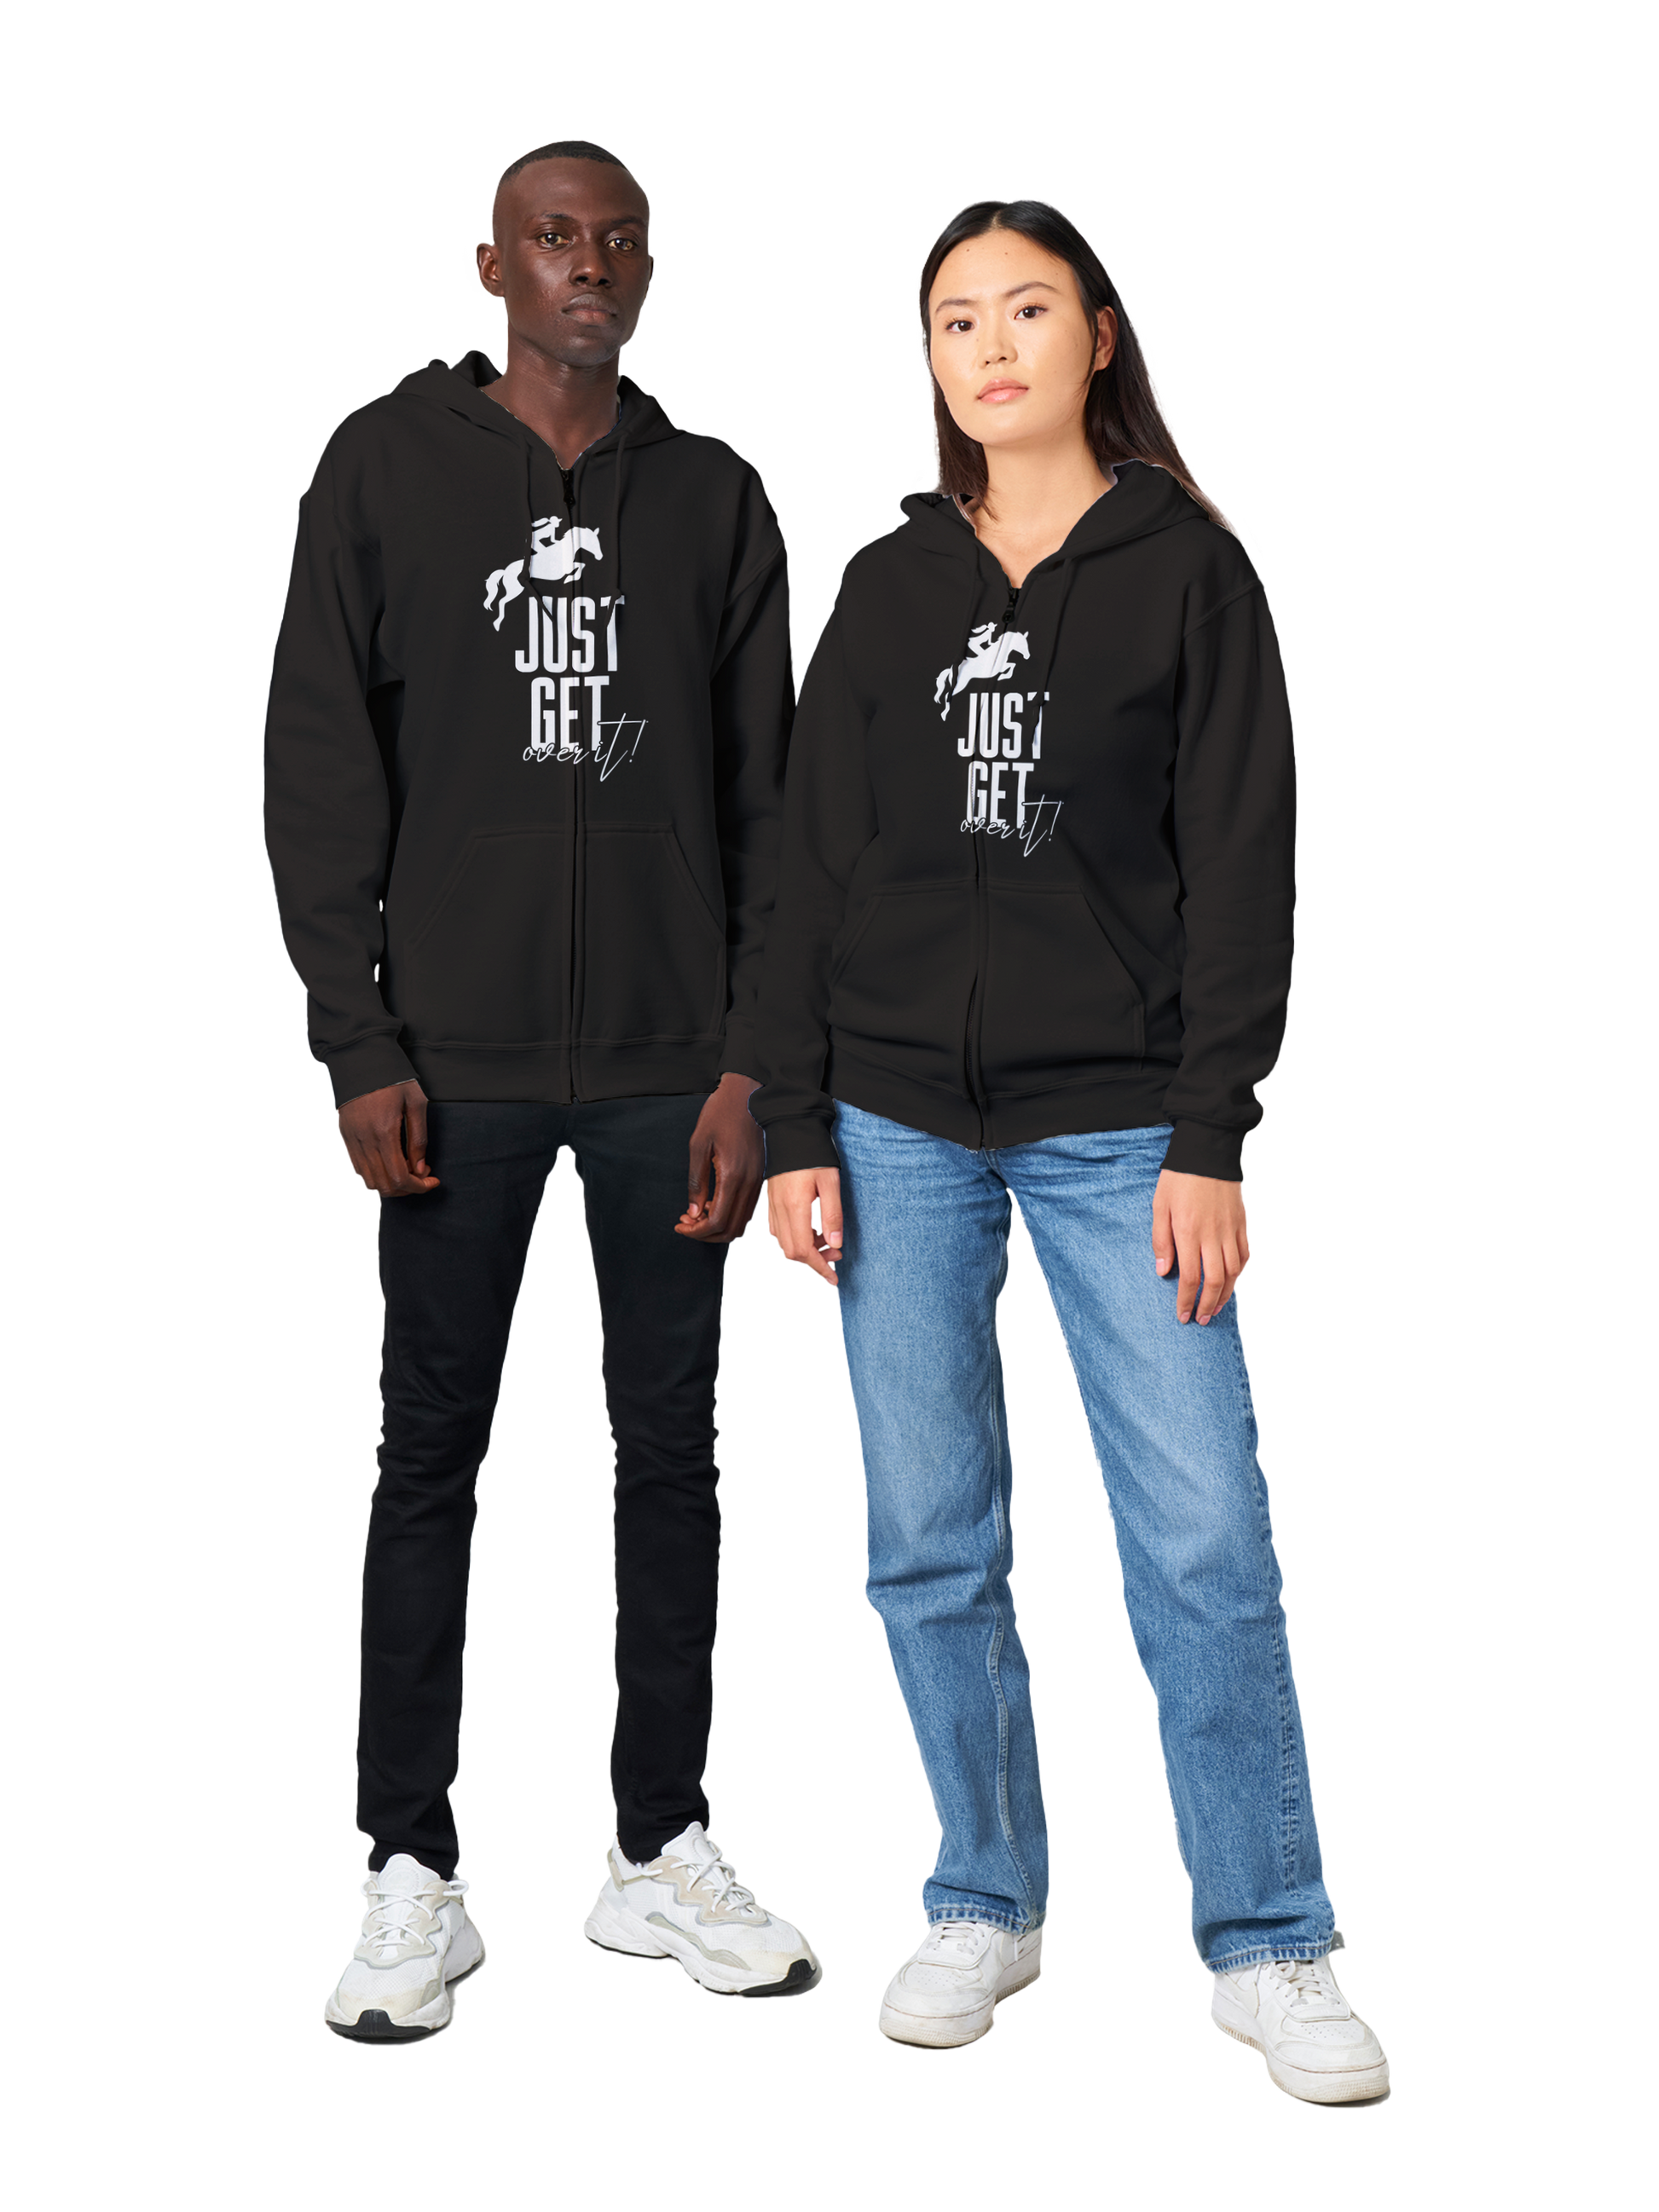 Hand Drawn Horse || Unisex Zip Hoodie - Design: "Get Over It"; Static Design; Personalizable Back Text